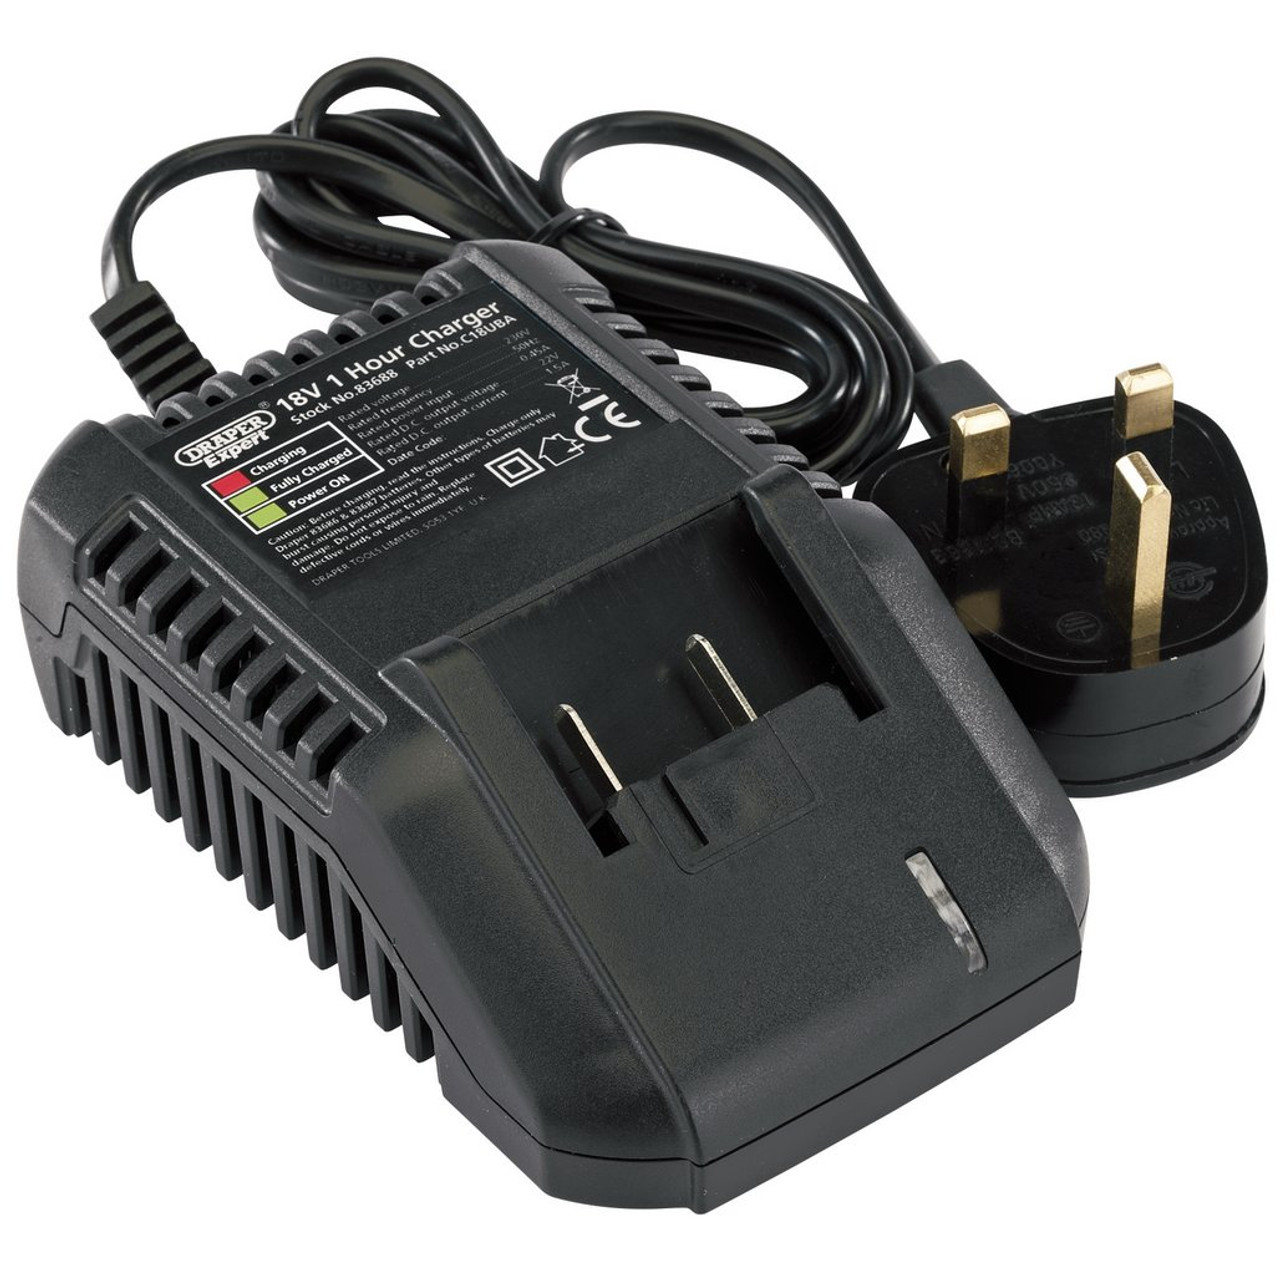 Electrical Drill, Battery Charger